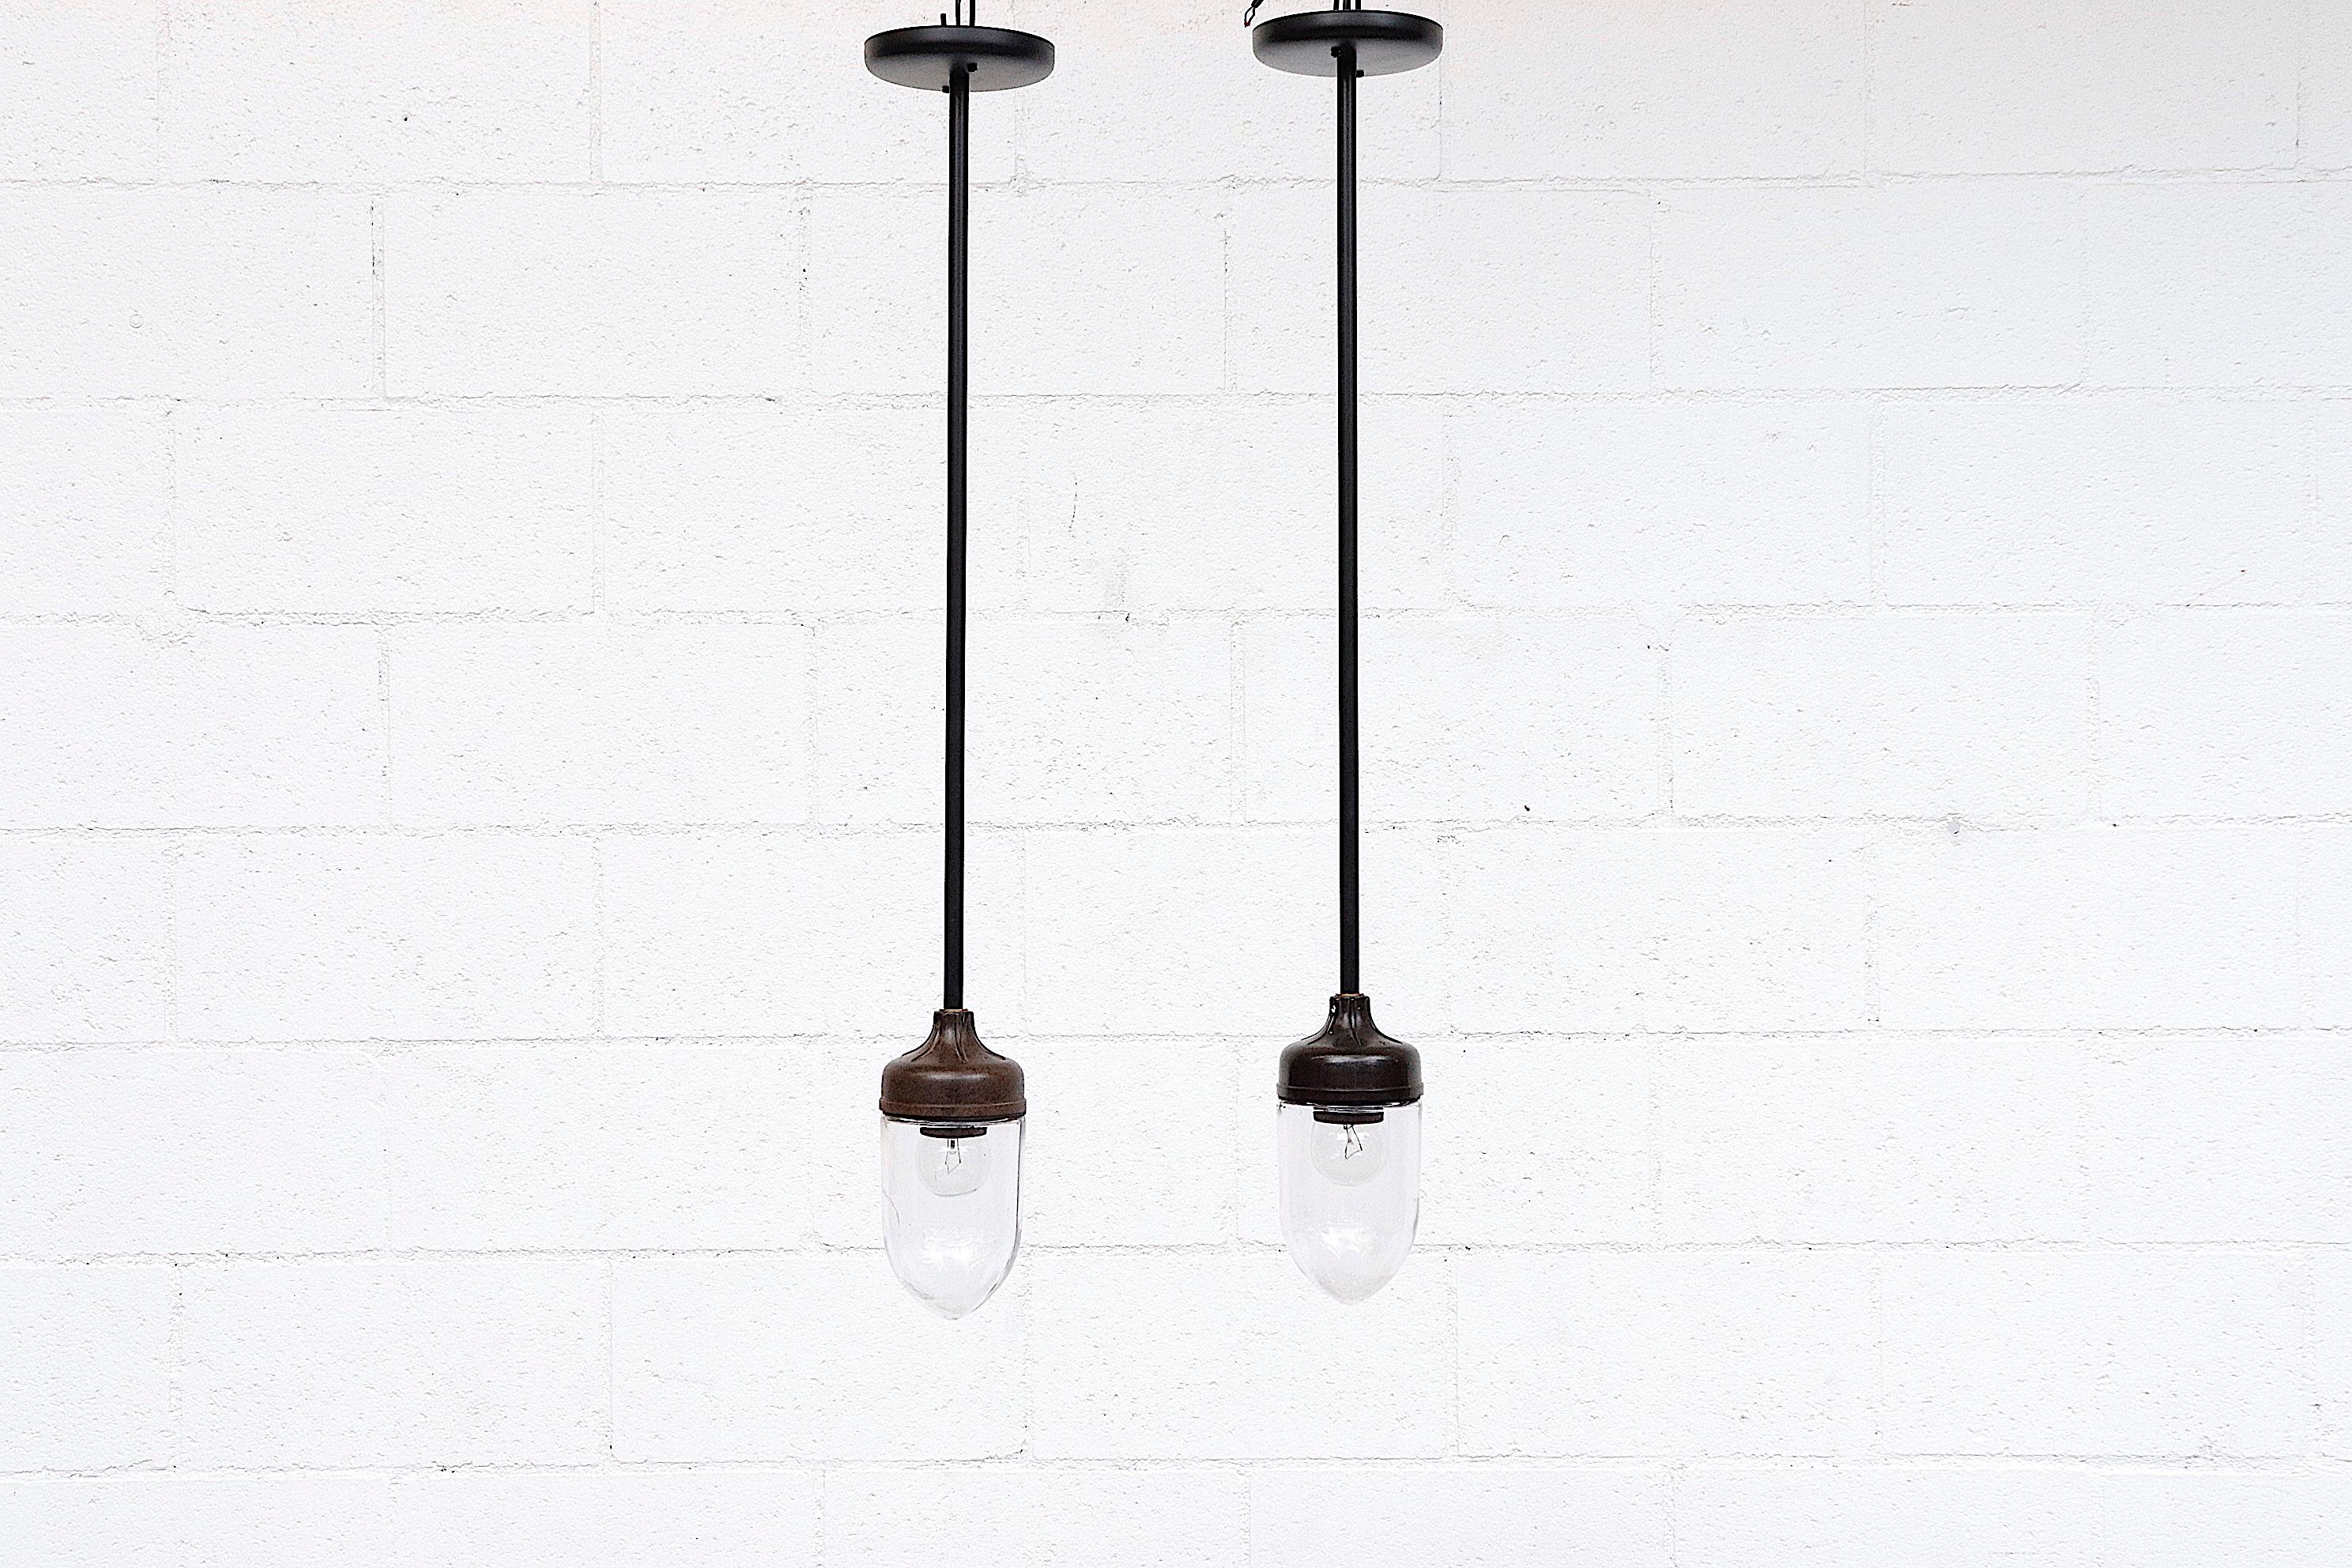 Pair of 1930s-1940s Bakelite Factory lights with original bottle glass shades and new powder coated rods.